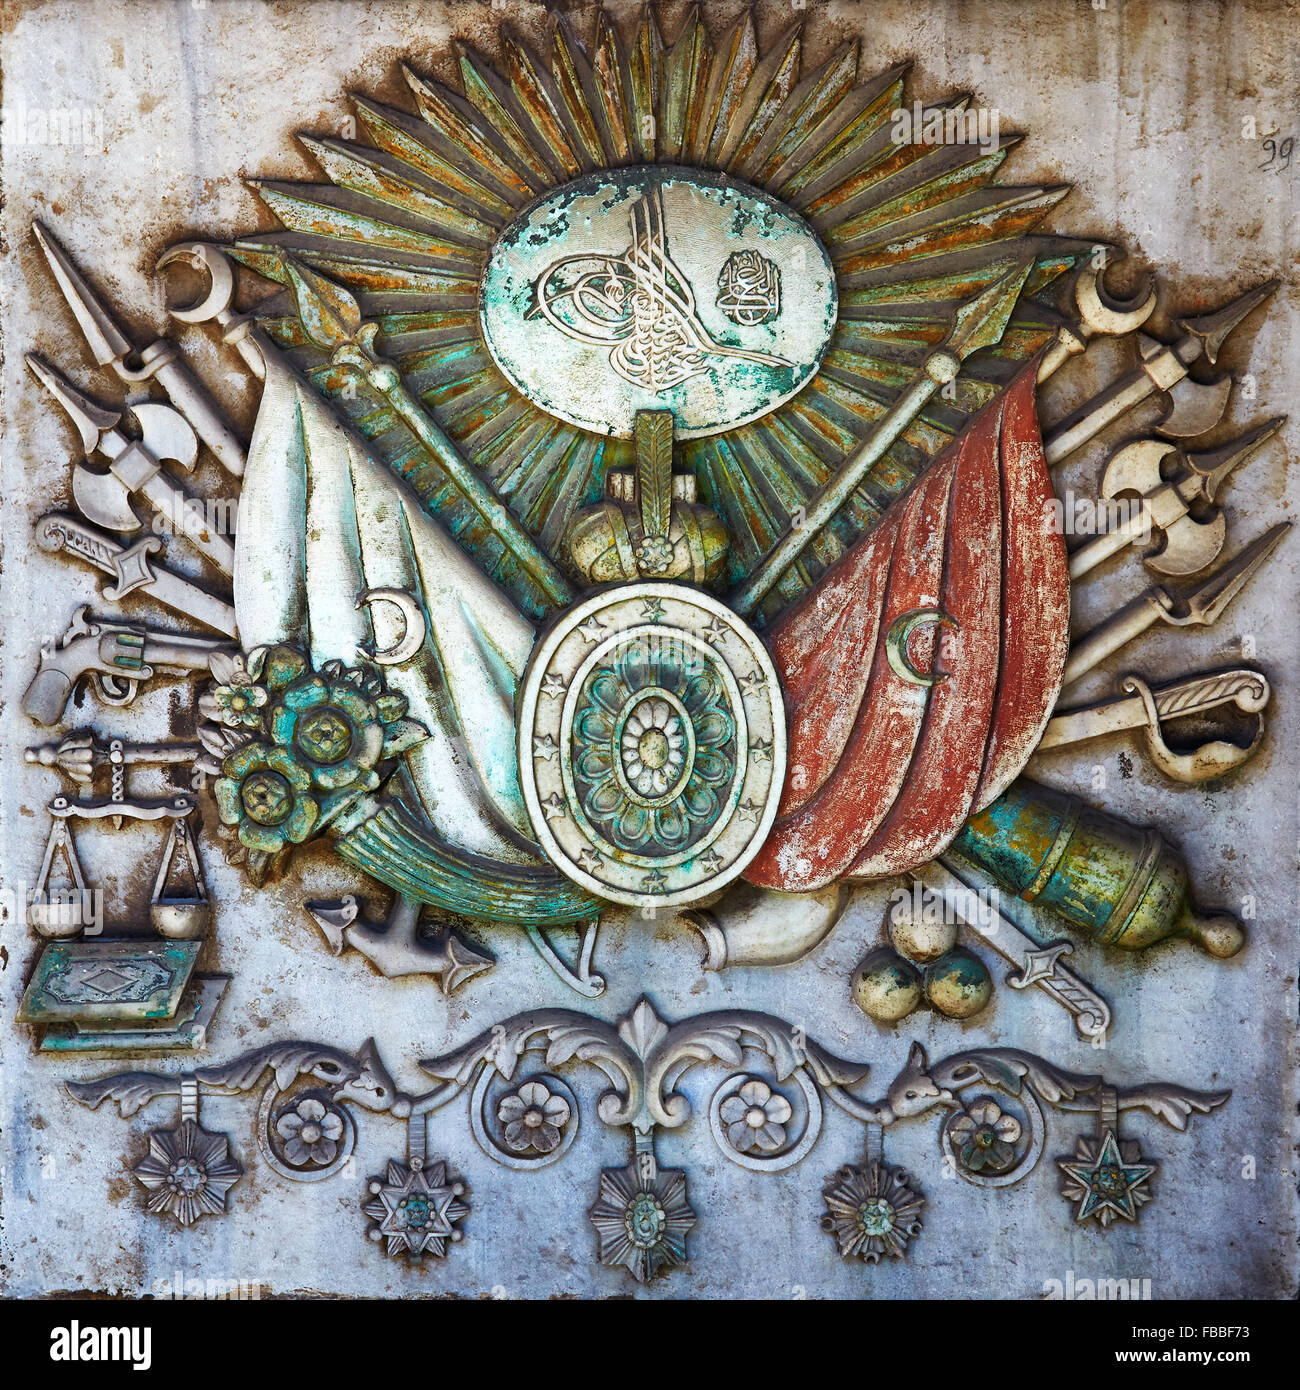 ISTANBUL, TURKEY - JULY 12, 2014: Coat of arms of the Ottoman Empire bas-relief on the wall on the territory of Topkapi Palace, Stock Photo